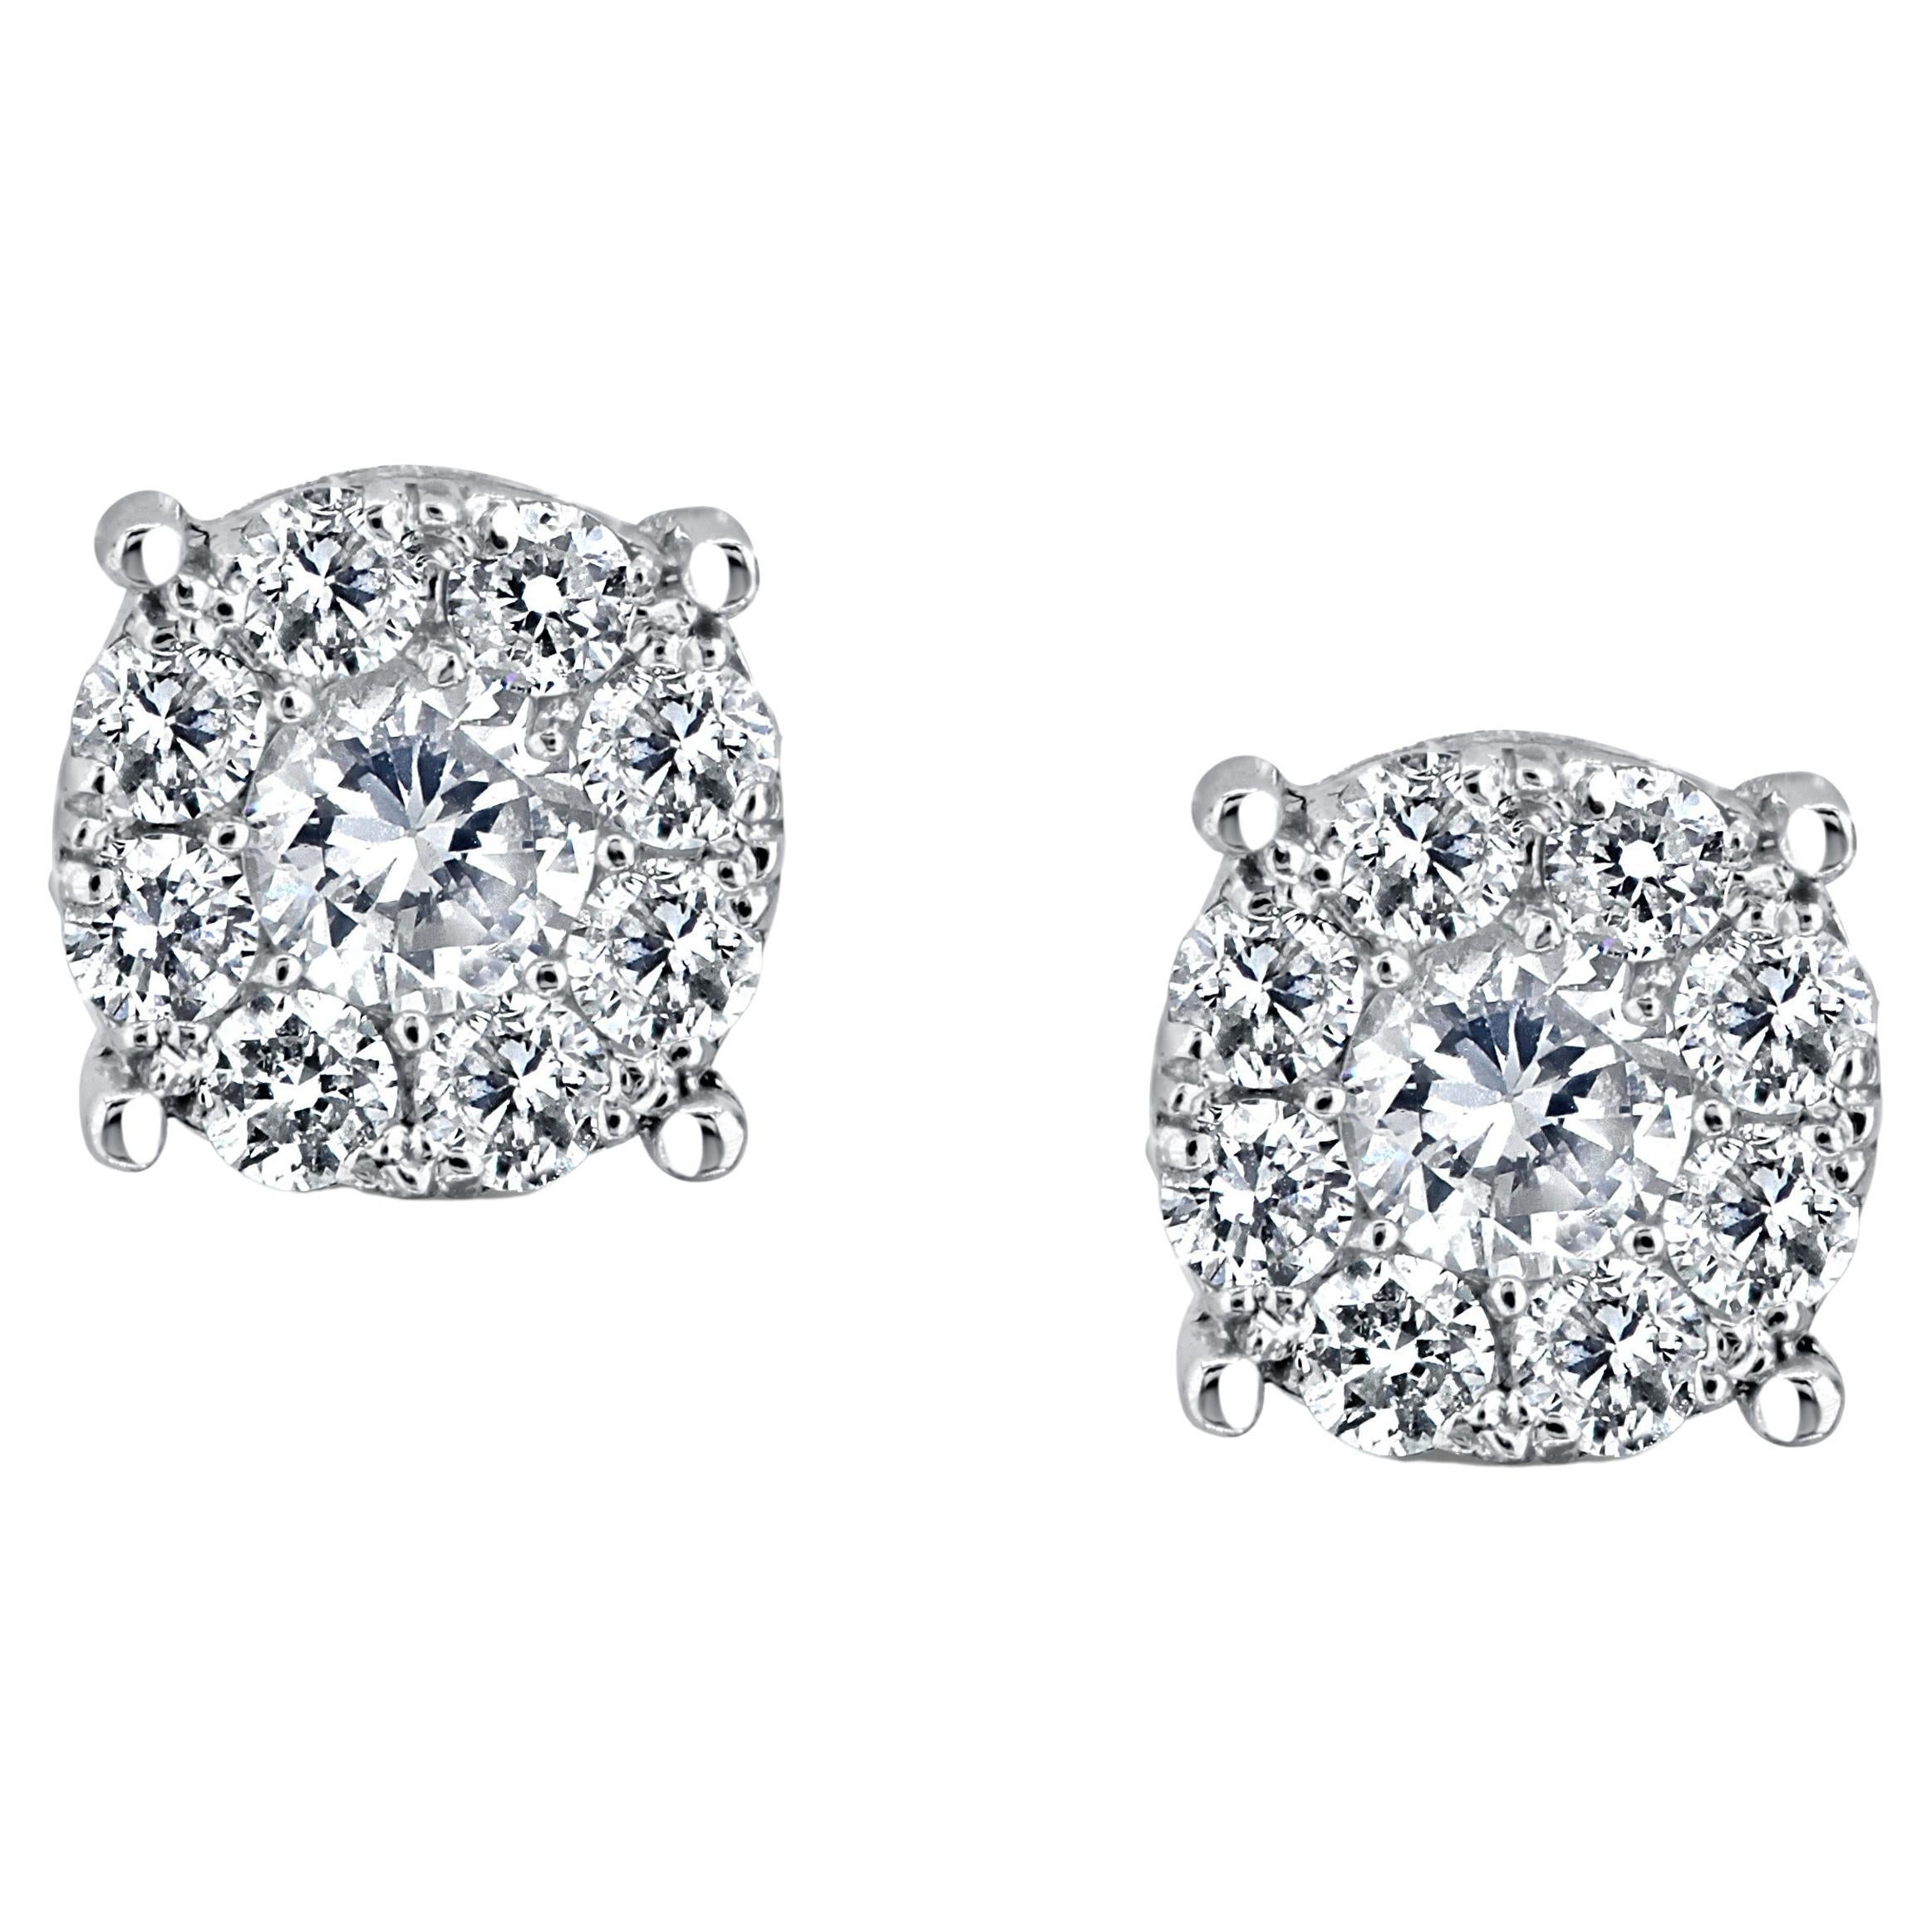 0.96 Carat Total Weight Diamond Stud Earrings in 14k White Gold ref1396 For Sale